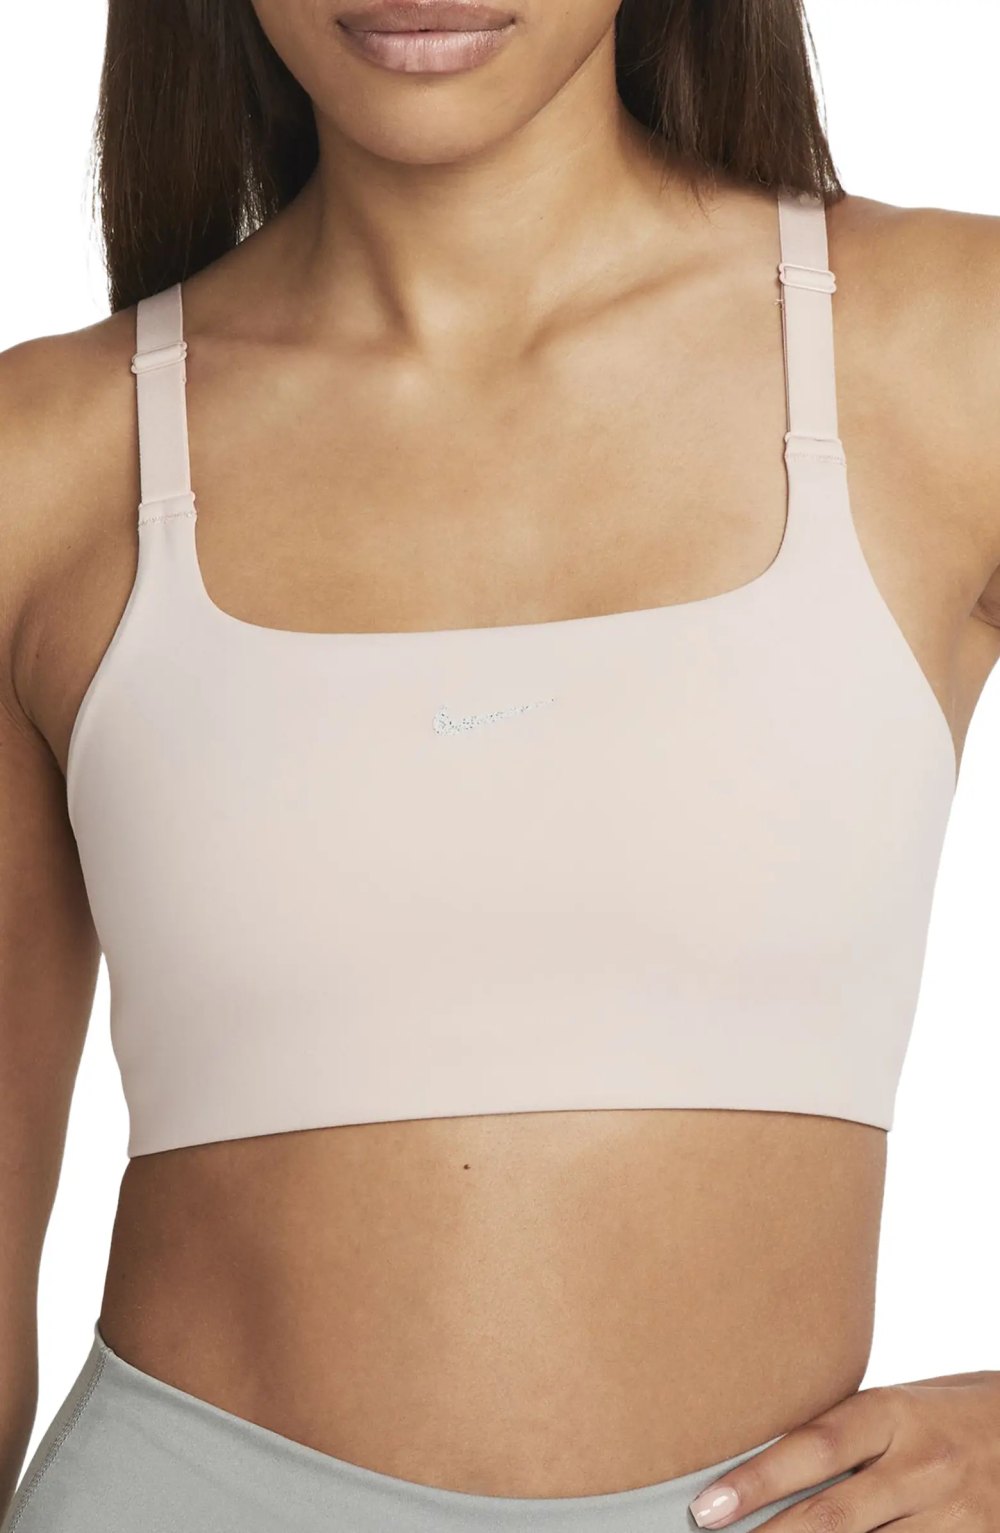 Does the align reversible bra A/B cup have removable padding? : r